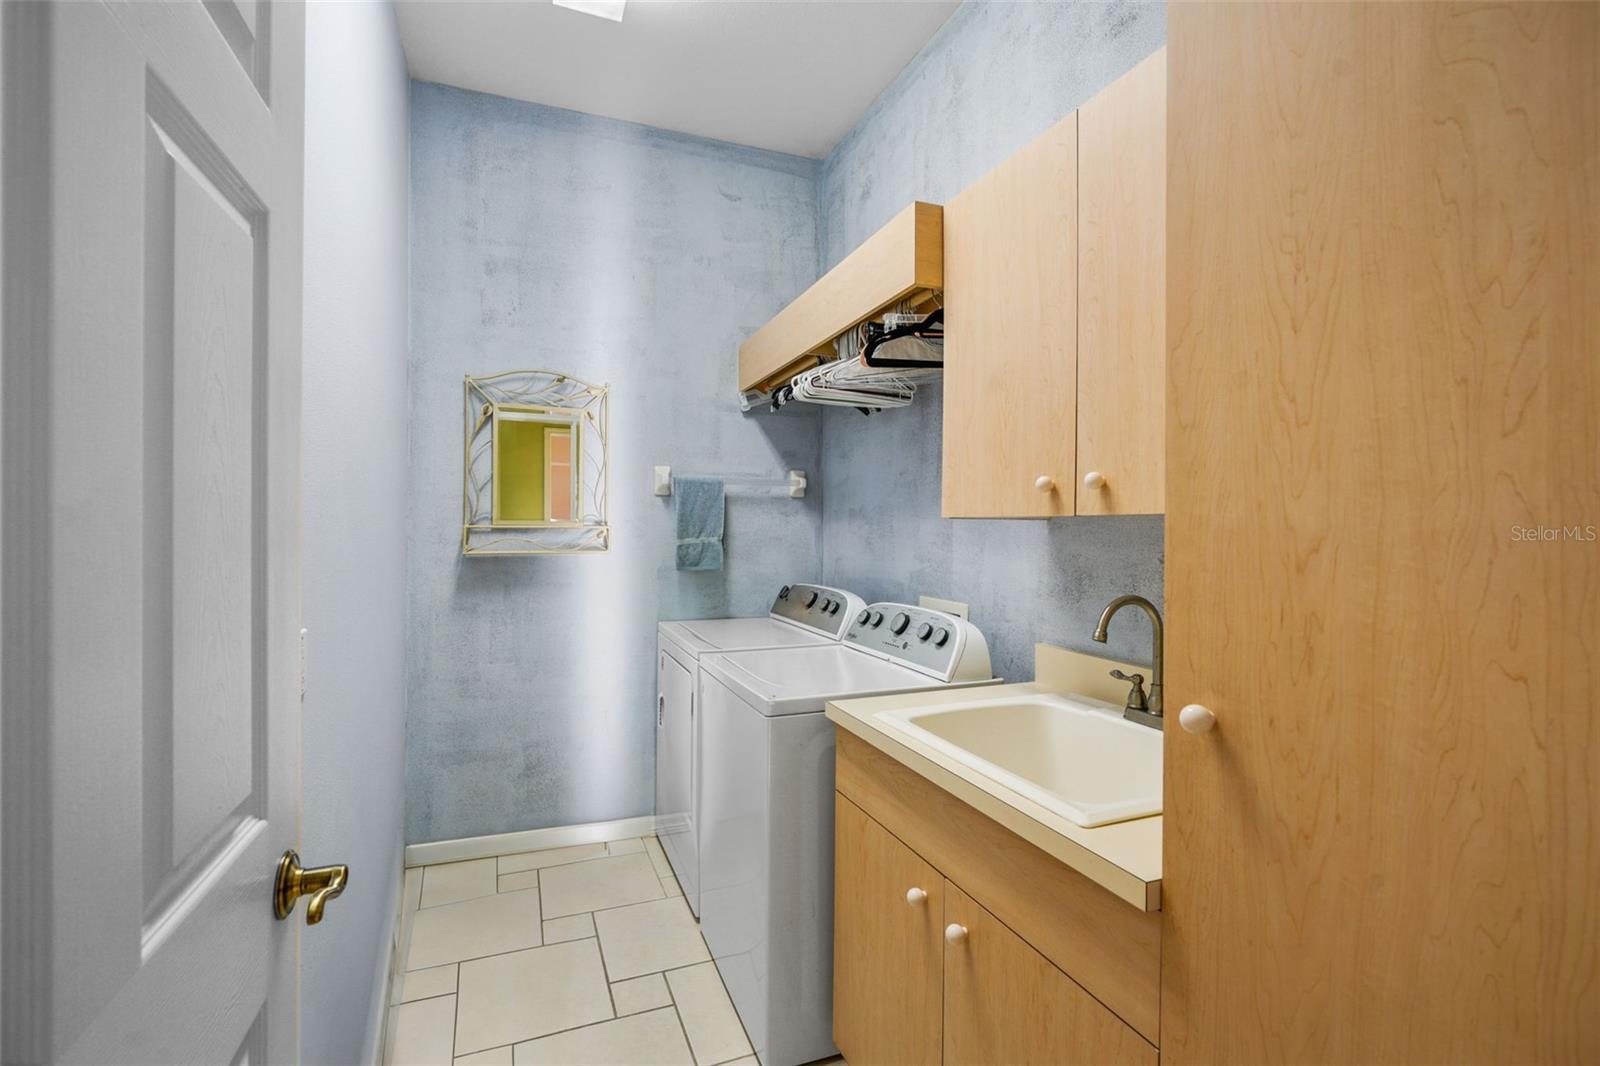 Laundry room with utility sink and cabinetry